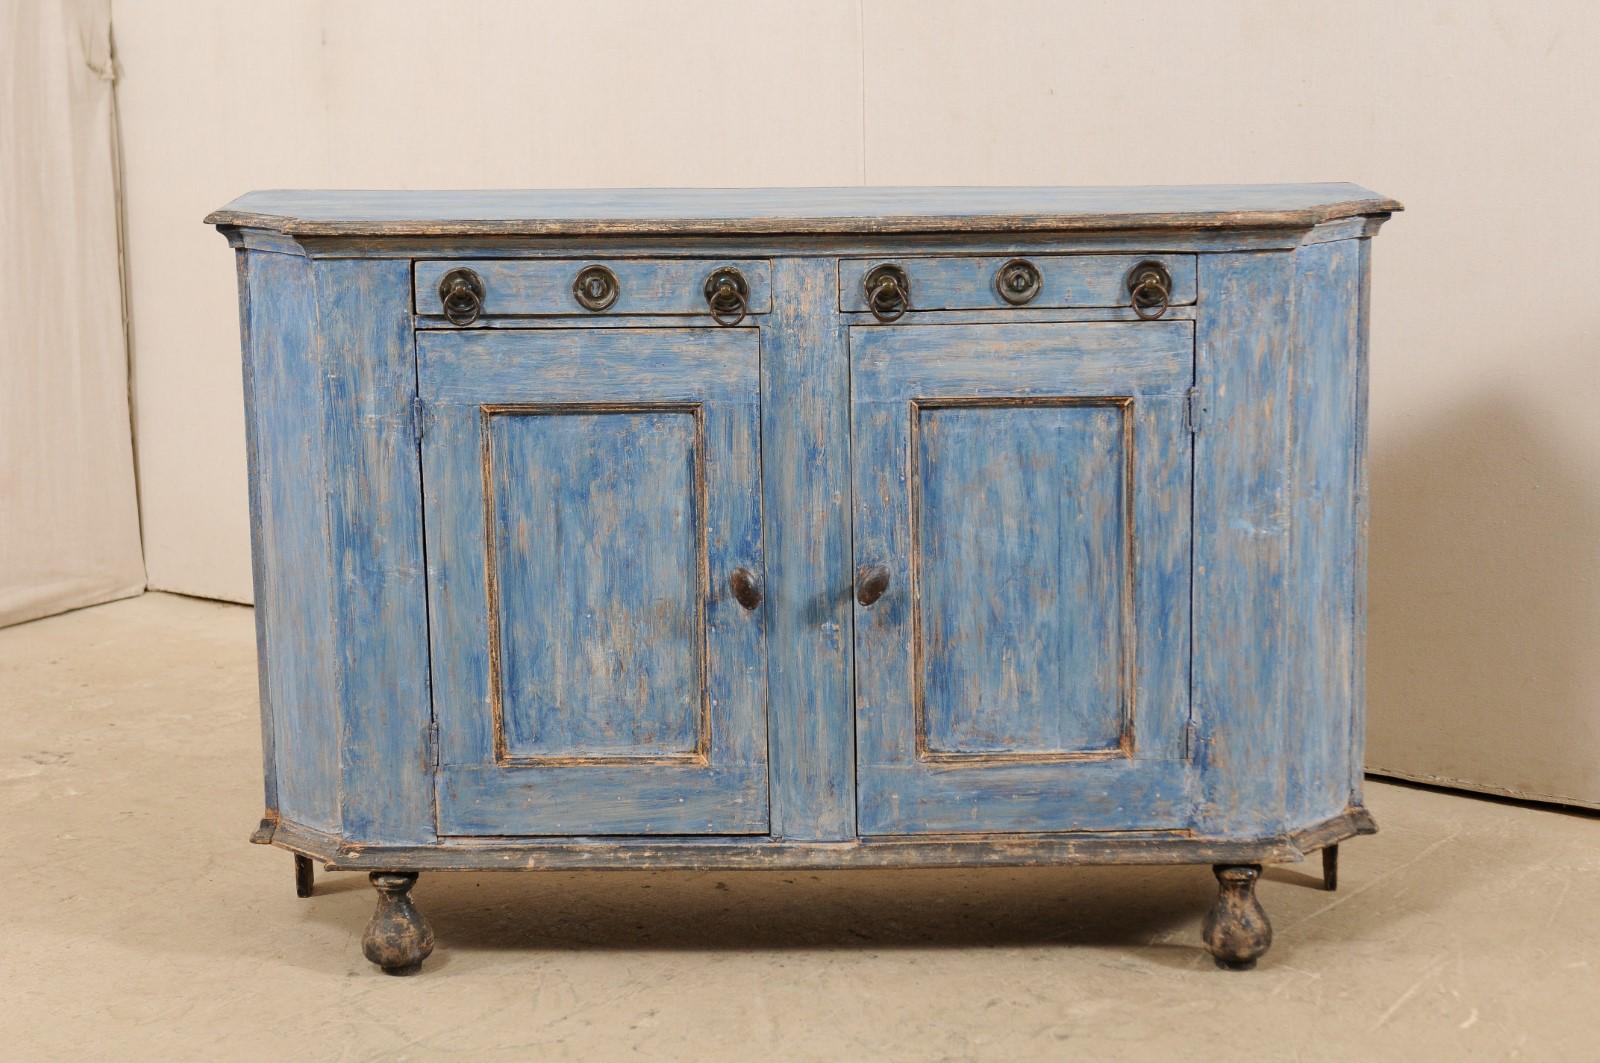 A French painted wood sideboard cabinet from the 19th century. This antique cabinet from France features a mostly rectangular top and case with canted sides, adding interest to it's shape, raised nicely upon bulb style wooden feet. The case houses a